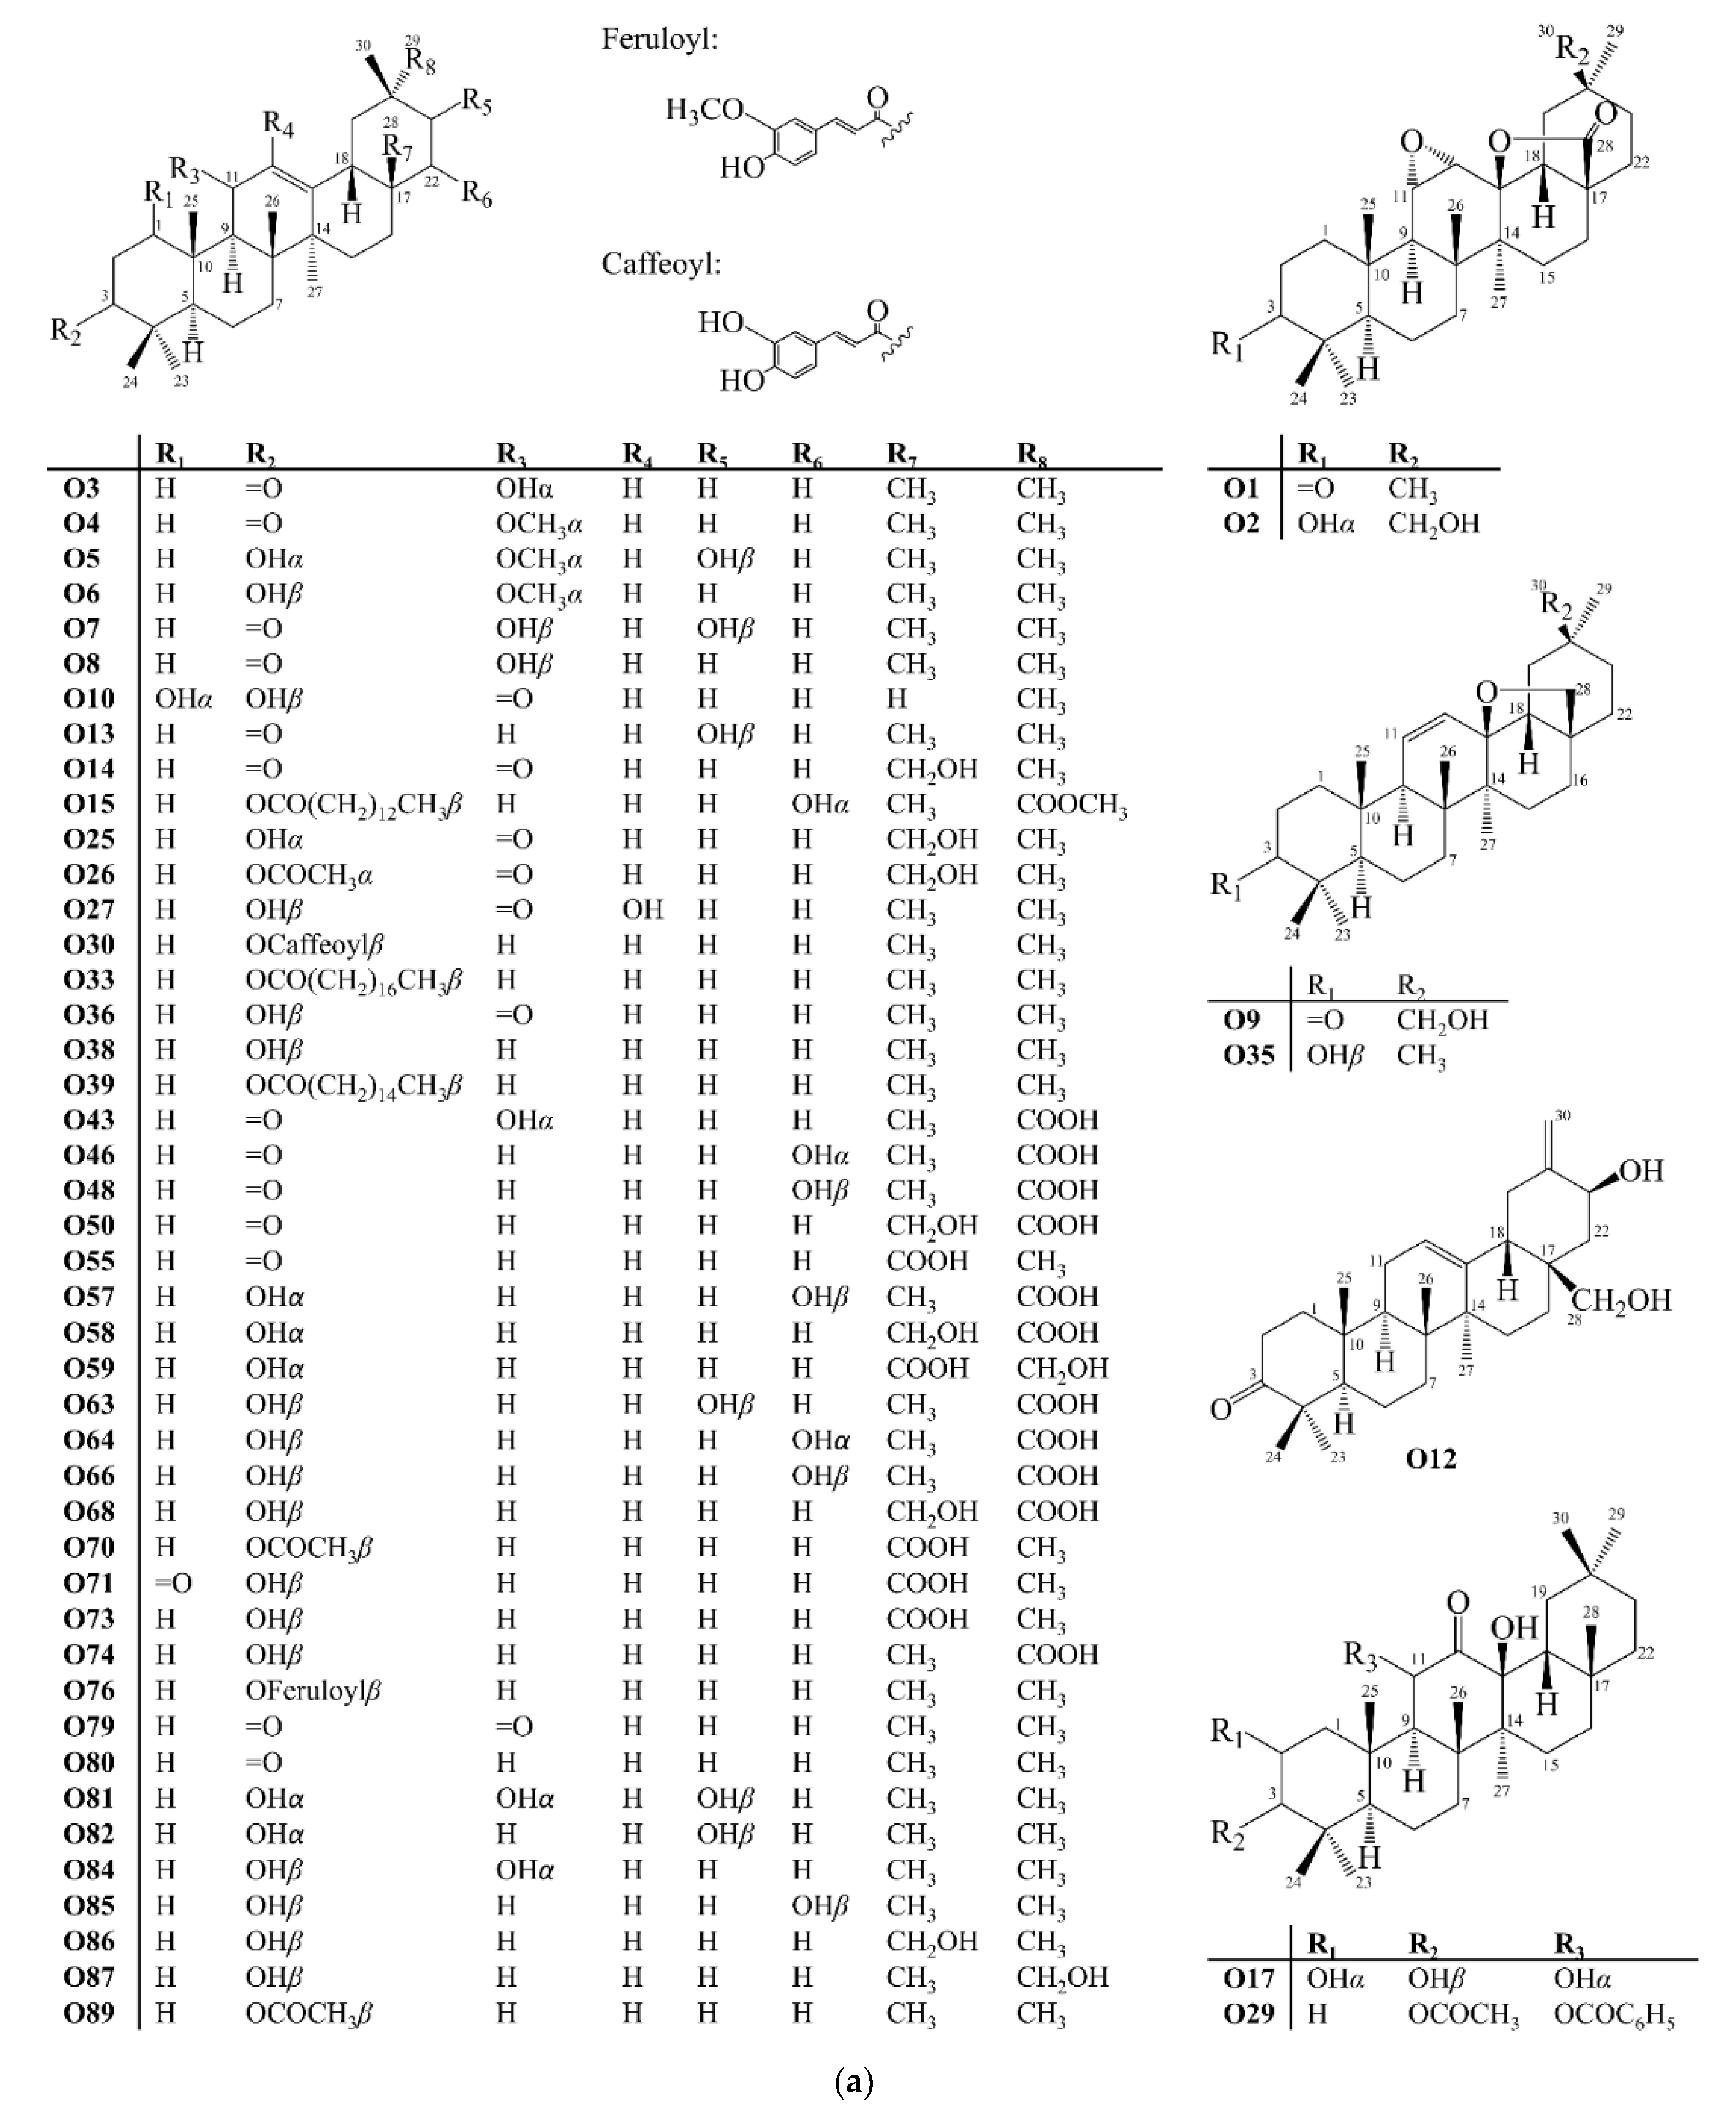 Molecules | Free Full-Text | Pentacyclic Triterpenoids Isolated